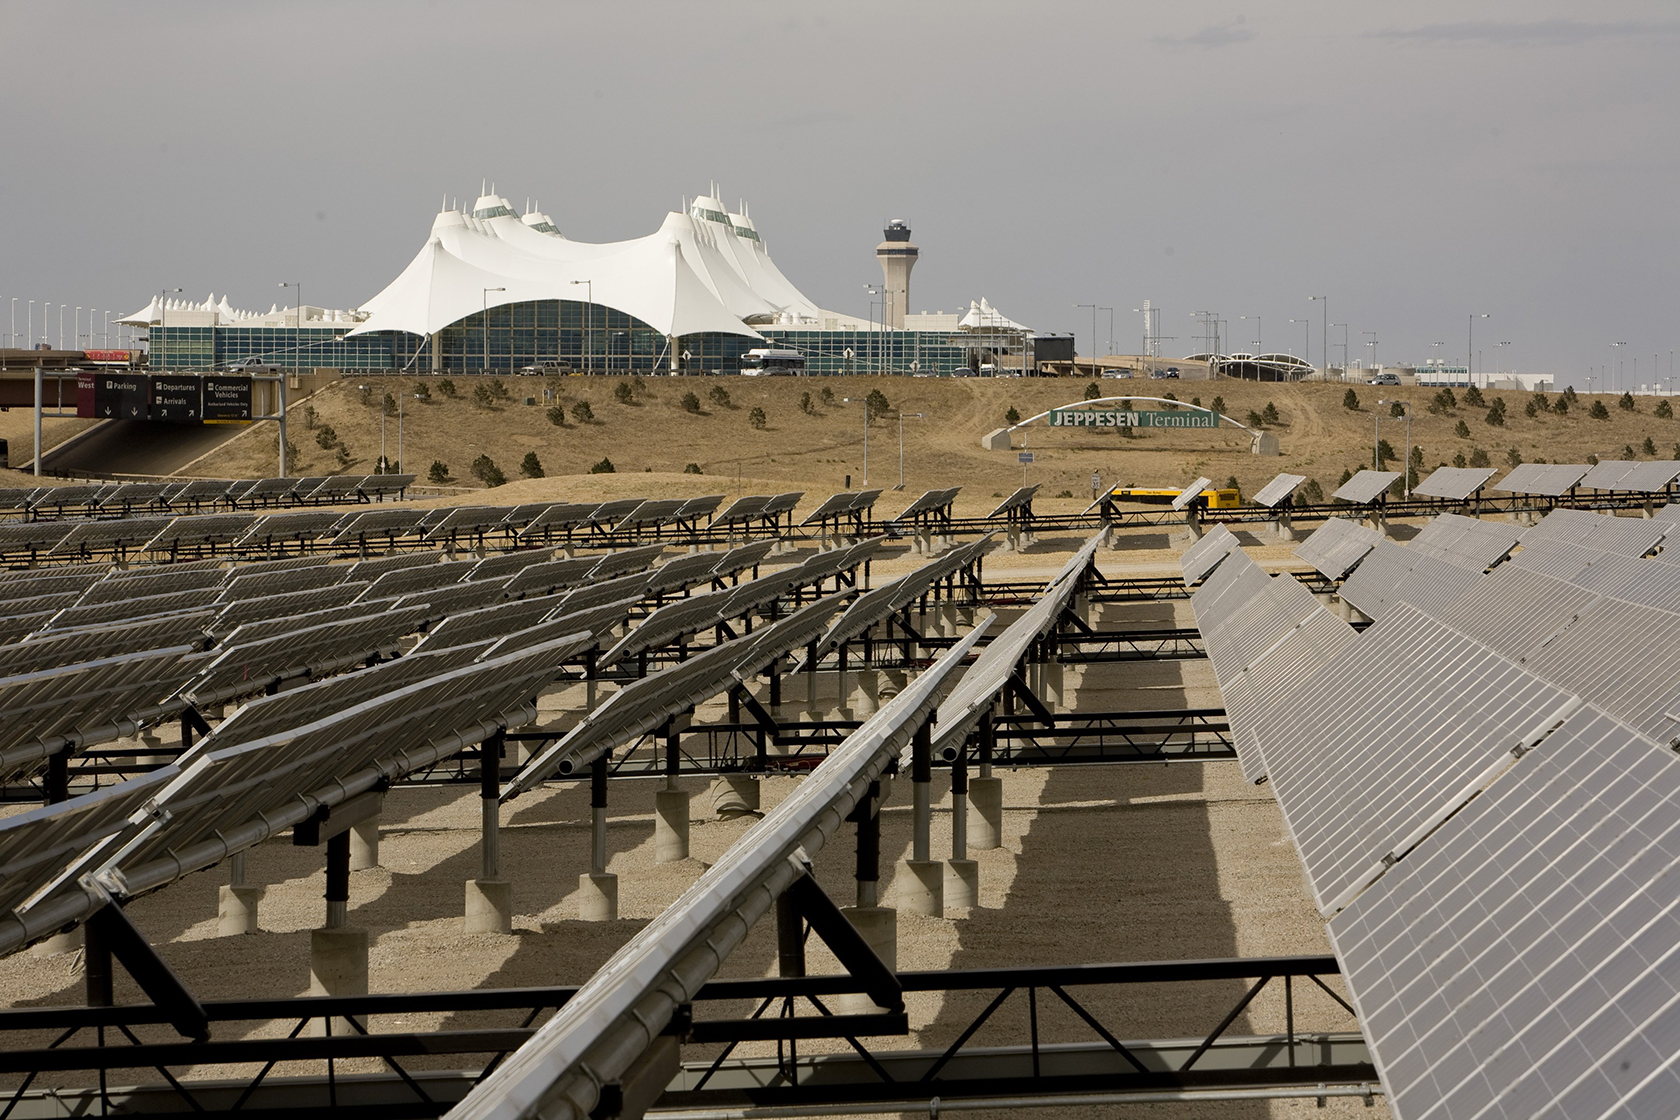 Solar panels foregrounded in photo of Denver International Airport